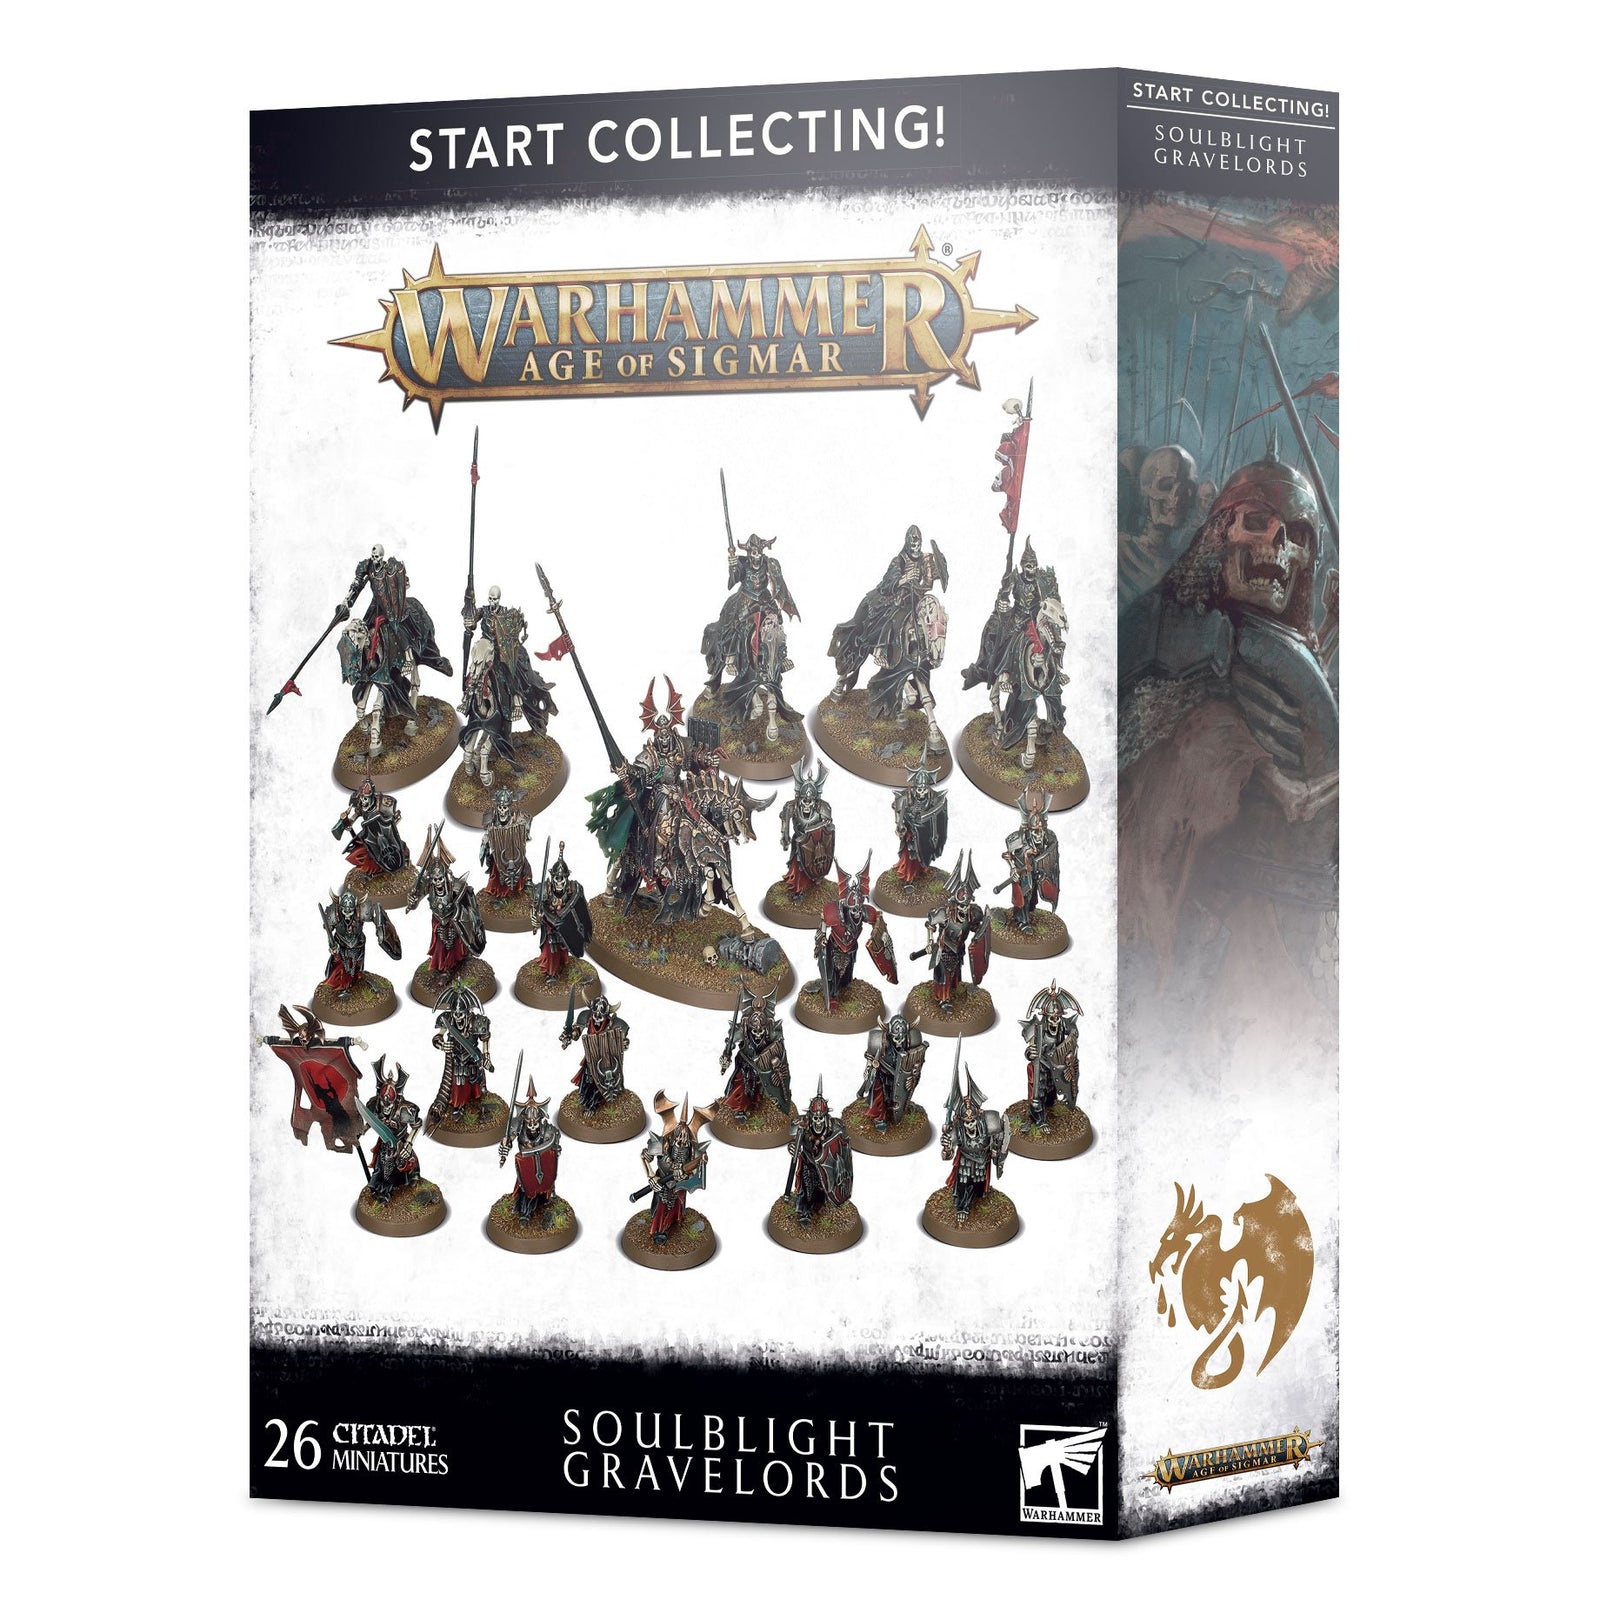 Soulblight Gravelords Start collecting box image